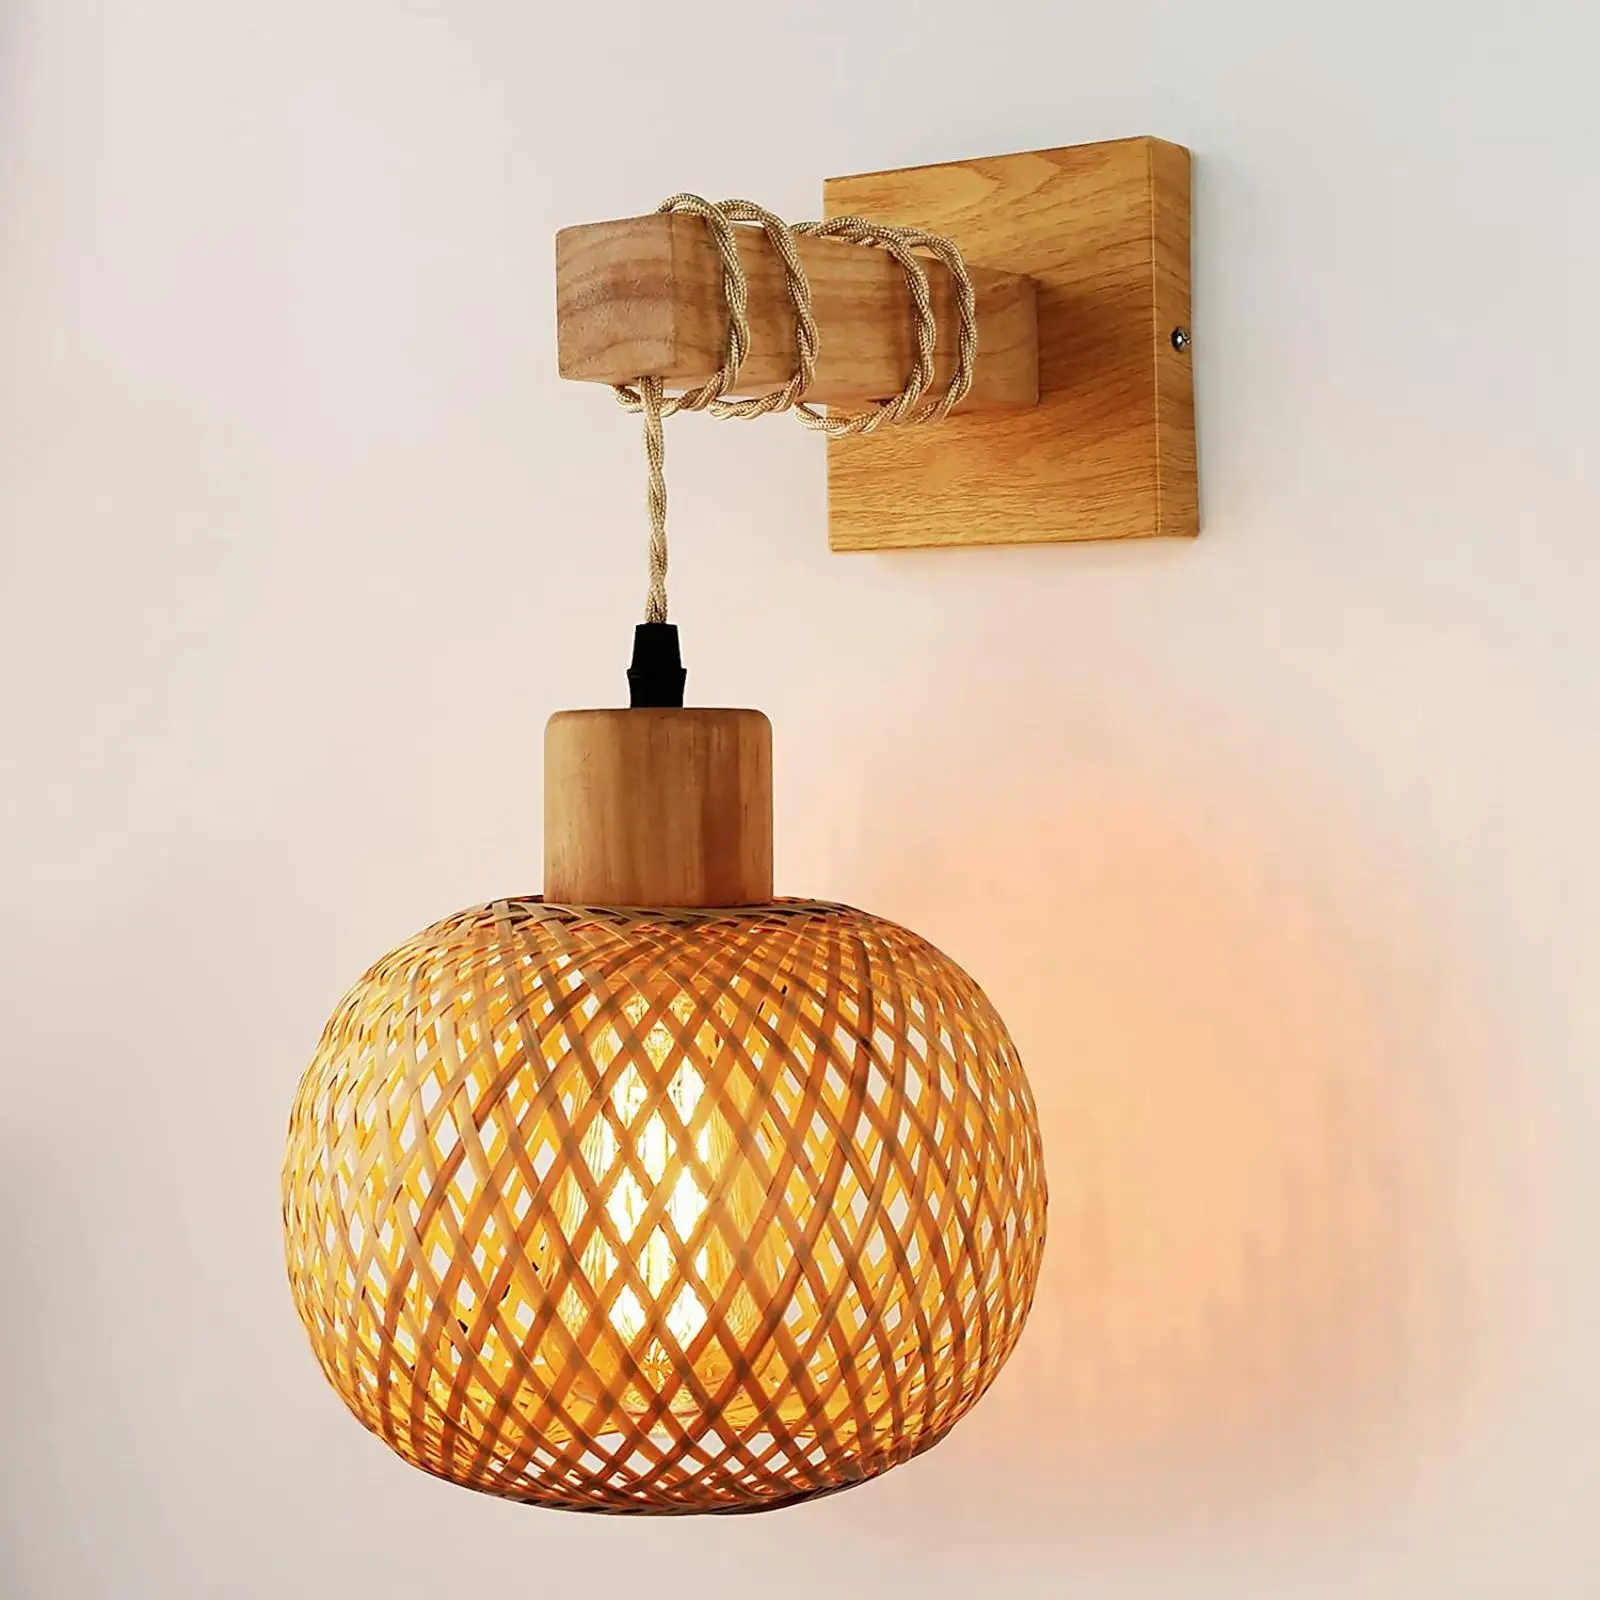 Rattan Wall Sconce Farmhouse Bamboo Woven Light Fixture for Bedroom Hallway